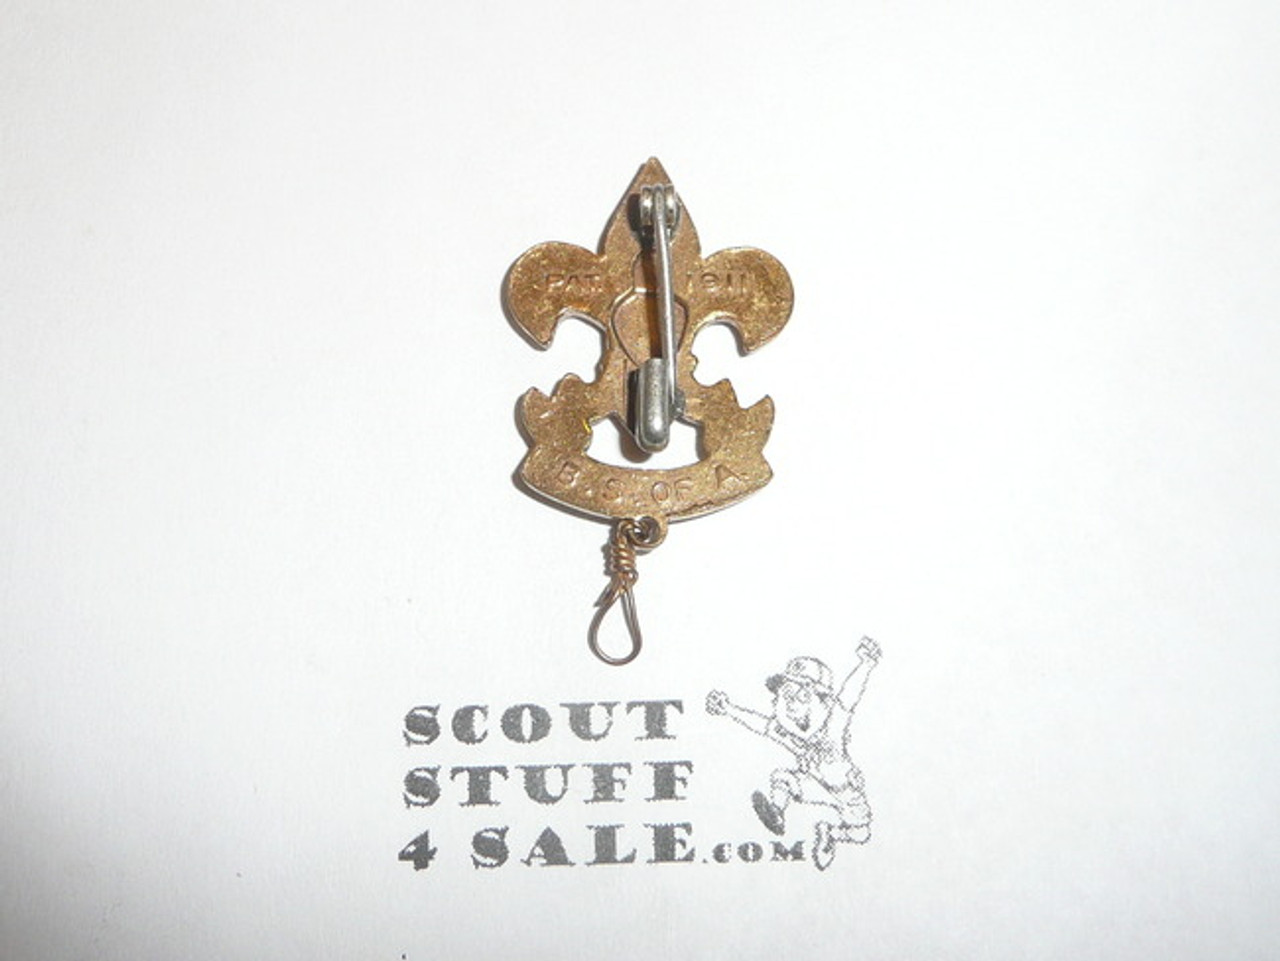 First Class Scout Rank Pin (Could be used as Generic Scouting Collar Pin), Safety Pin Clasp, 33mm tall (incl knot), PAT 1911 & BS of A back markings, wire knot